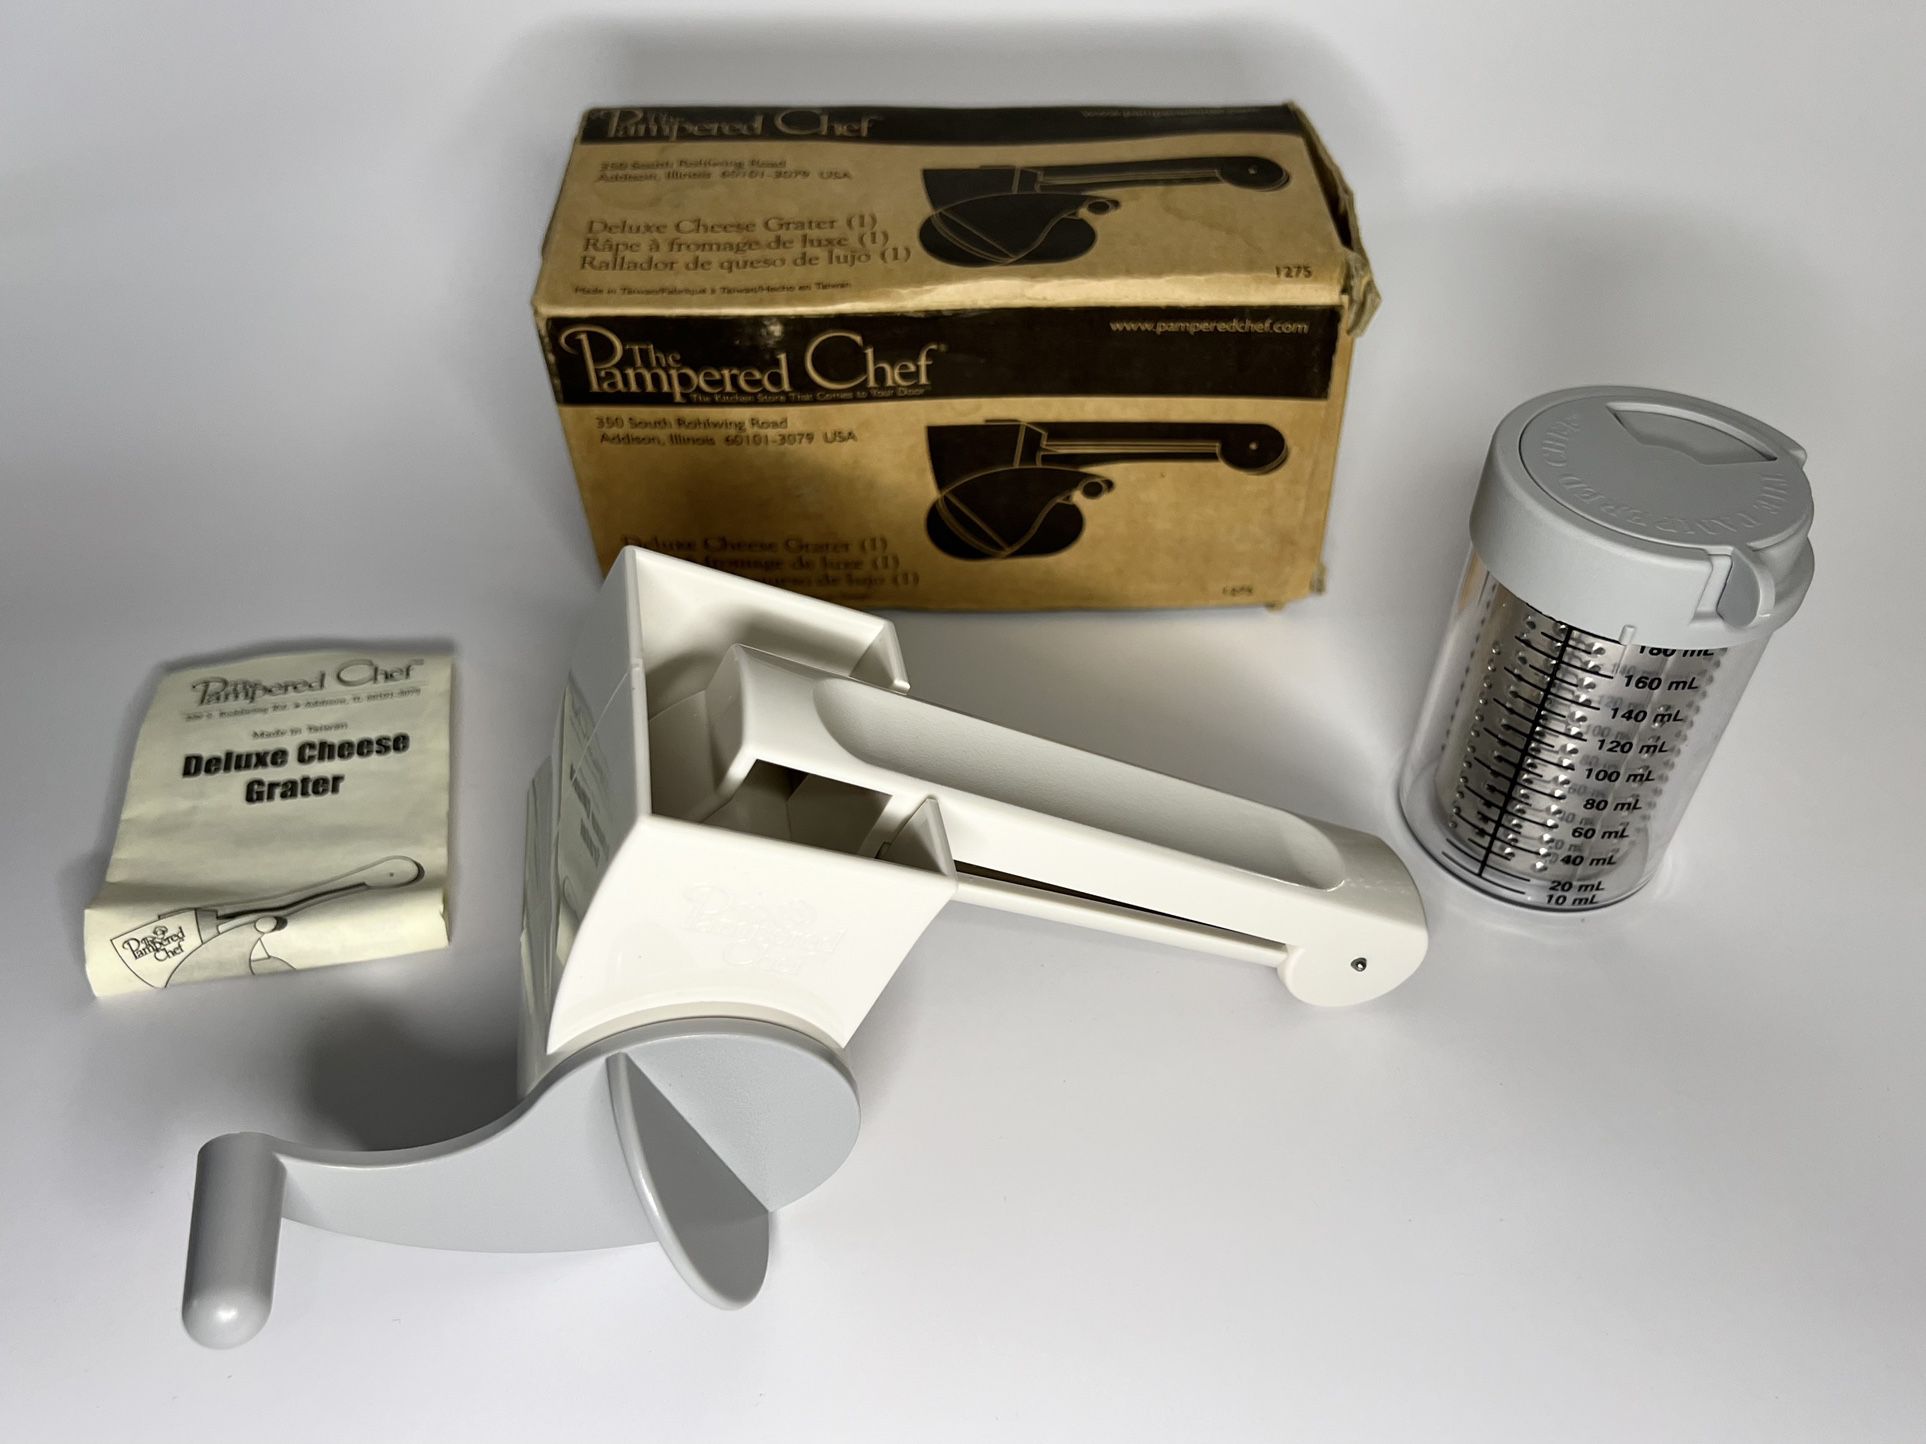 Pampered Chef Deluxe Cheese Grater #1275 Original Box & Instructions